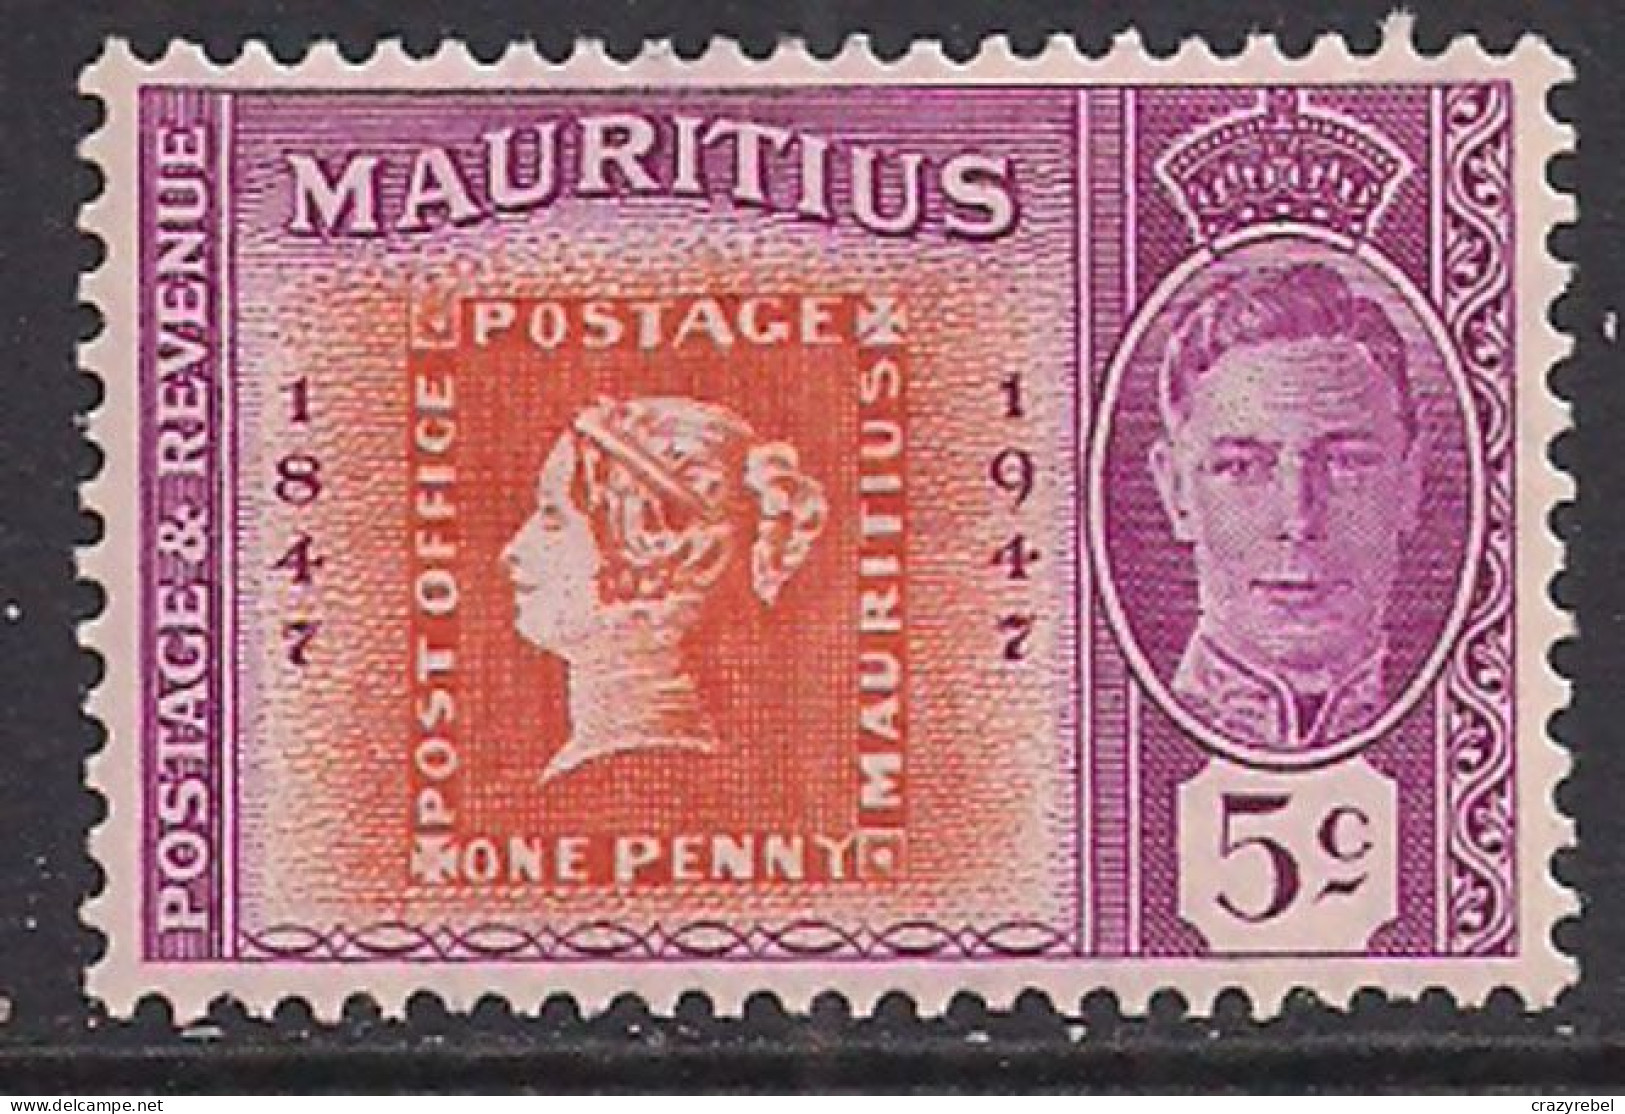 Mauritius 1948 KGV1 5c Post Office Red MNH SG 266 ( F967 ) - Maurice (1968-...)